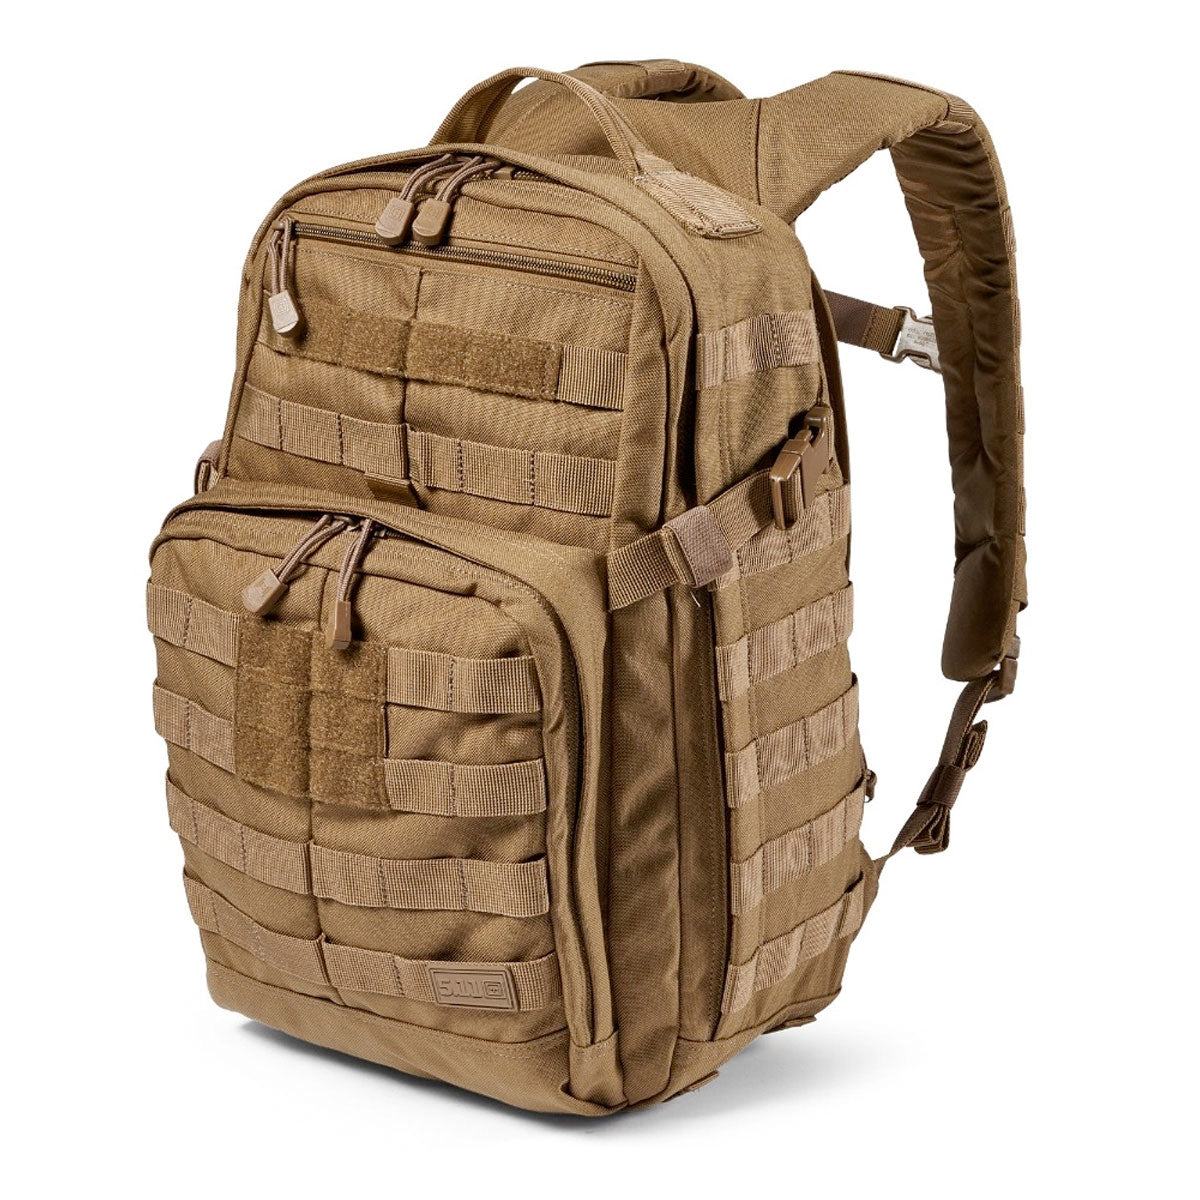 5.11 Tactical Rush 12 Backpack 2.0 Bags, Packs and Cases 5.11 Tactical Kangaroo Tactical Gear Supplier Tactical Distributors Australia